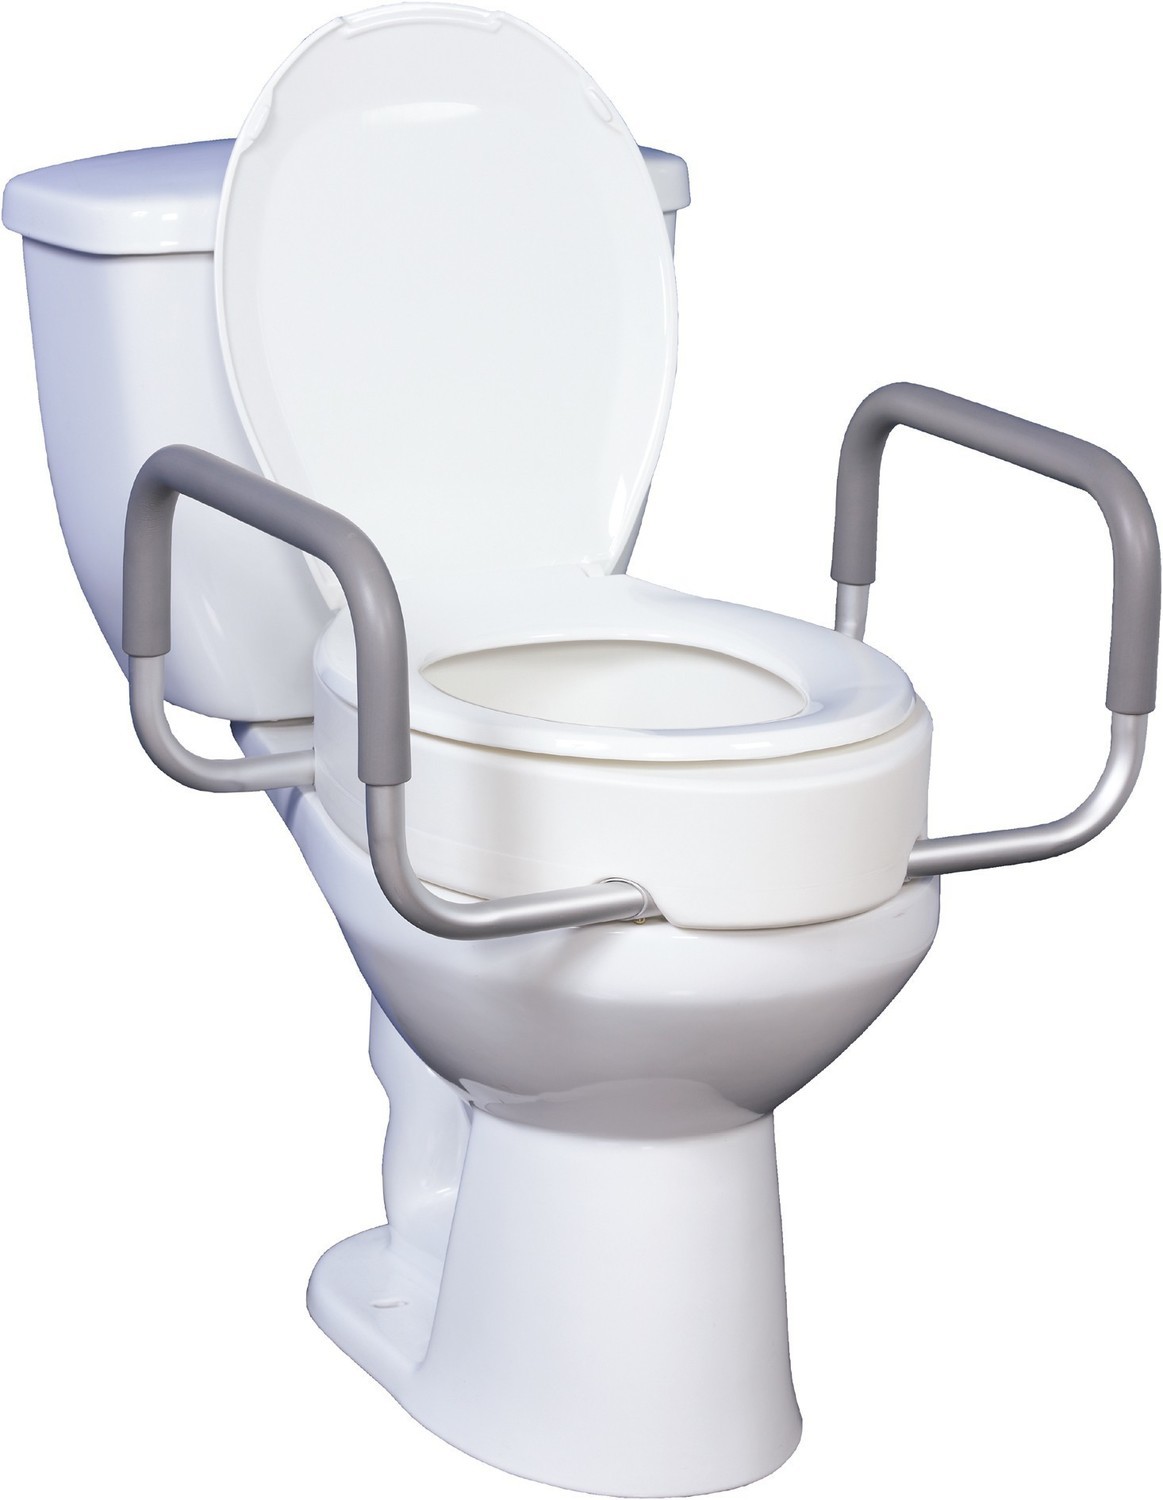 Raised Toilet Seat with Arms (Essential Medical)